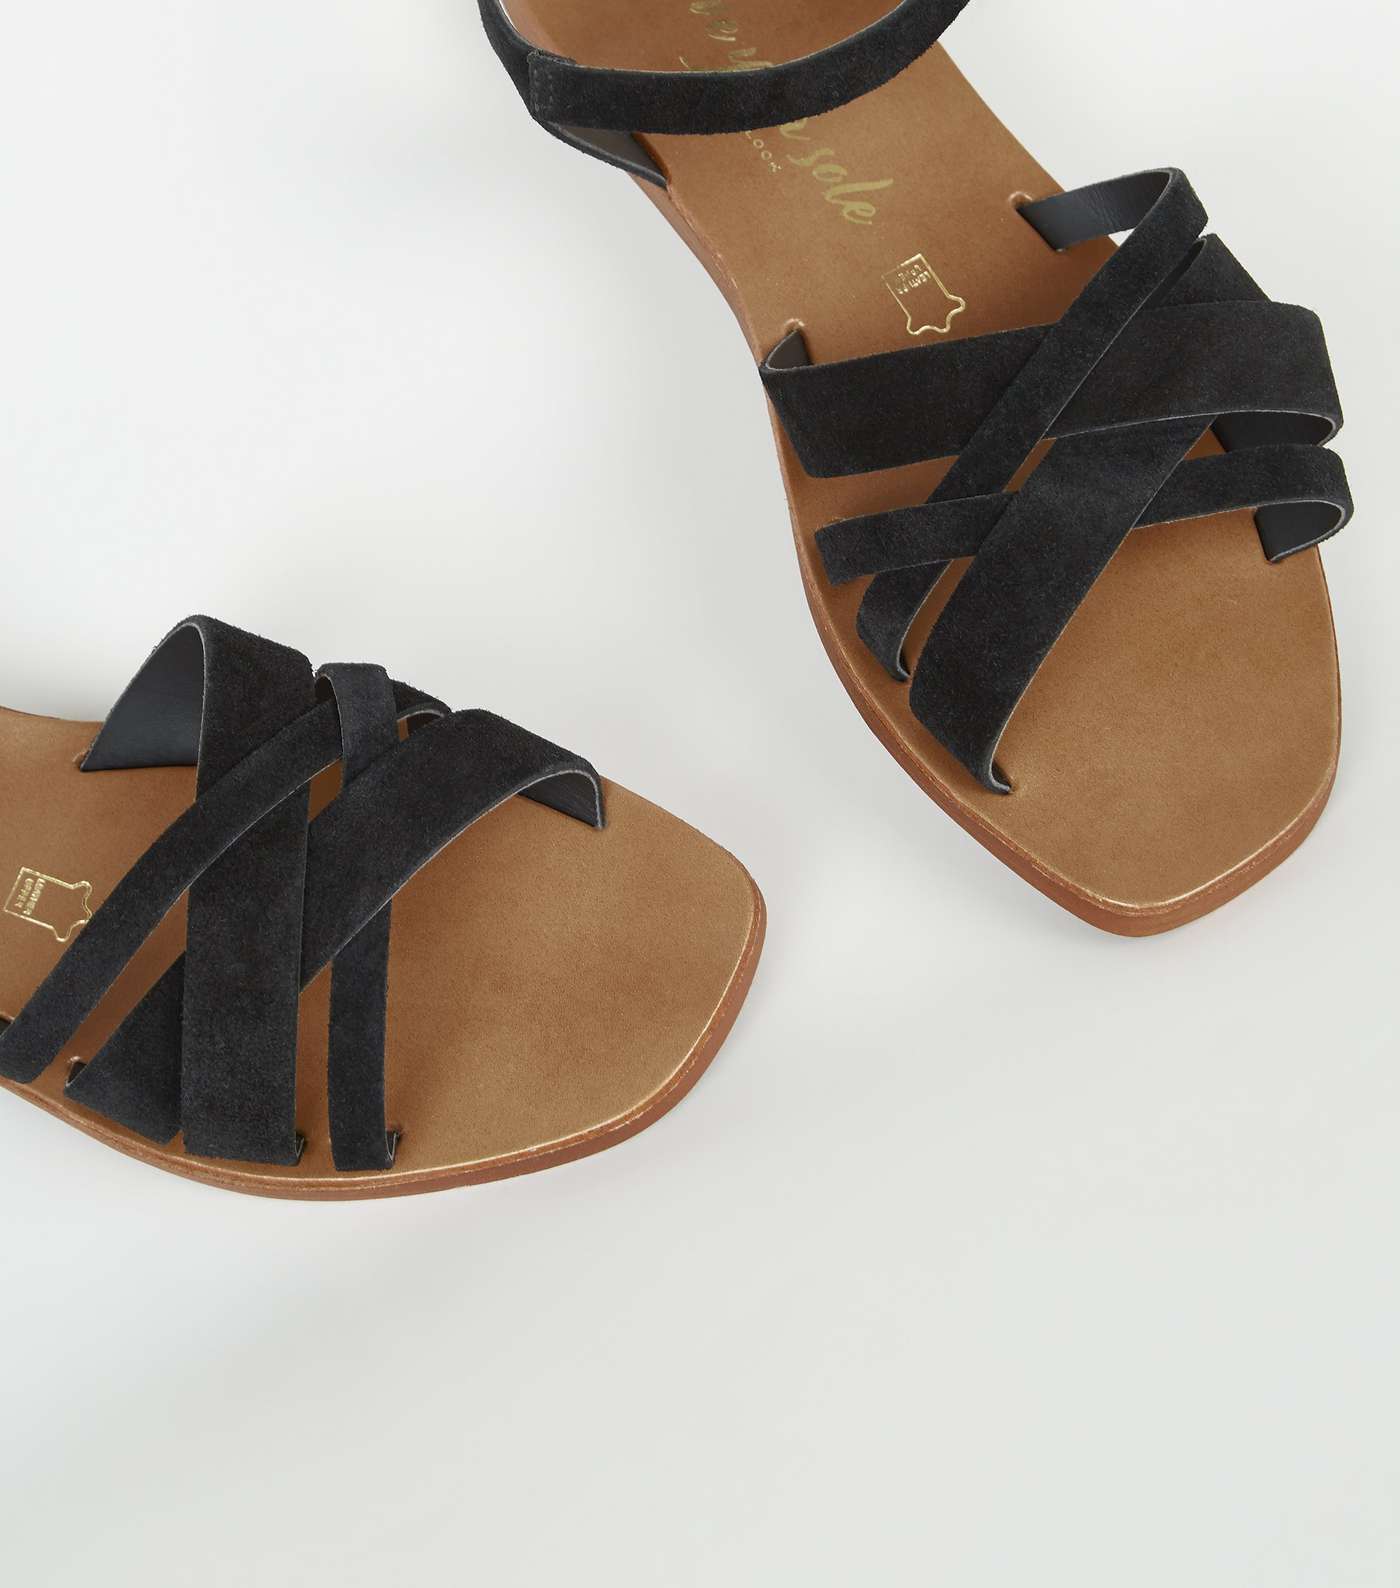 Wide Fit Black Suede 2 Part Strappy Sandals Image 4